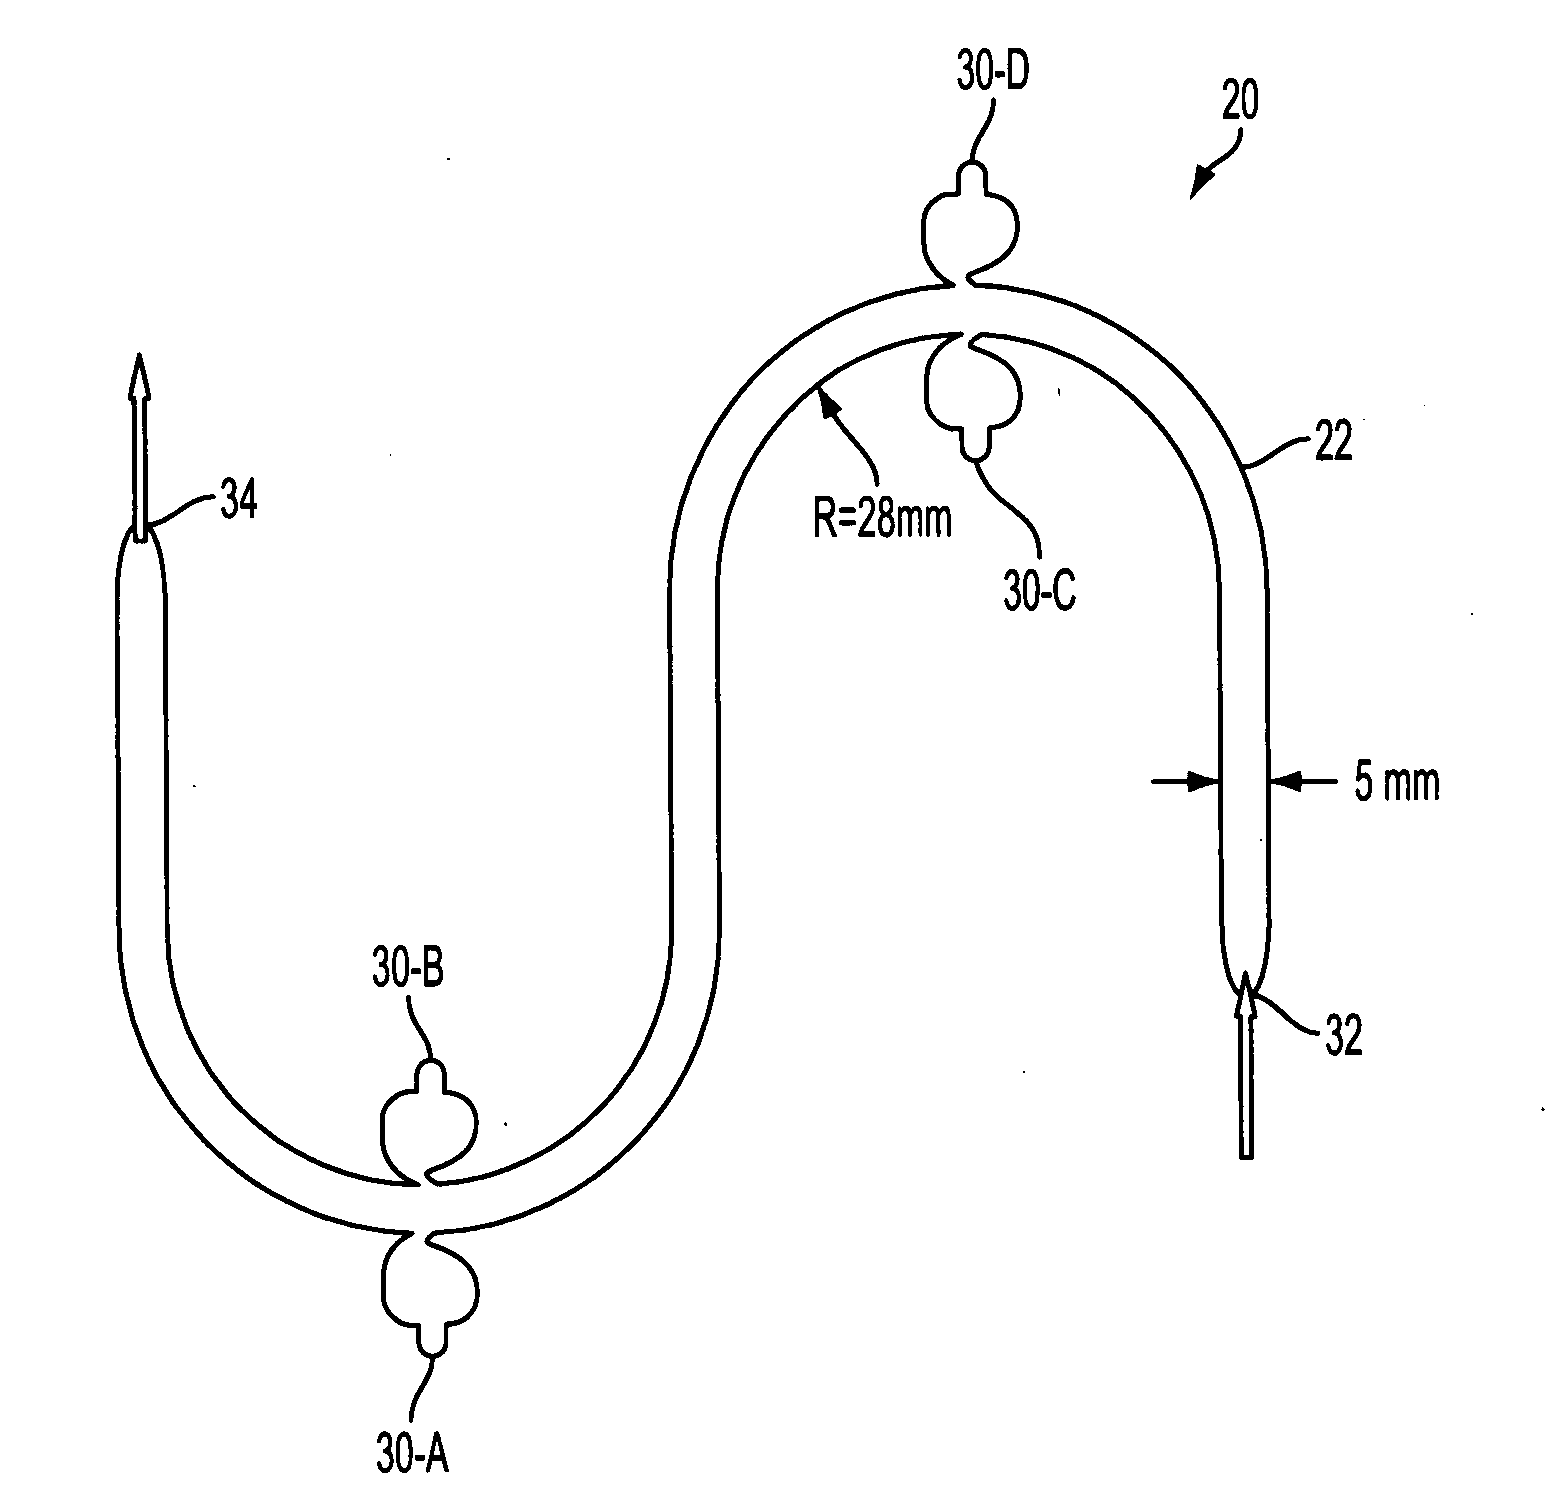 Serpentine structures for continuous flow particle separations